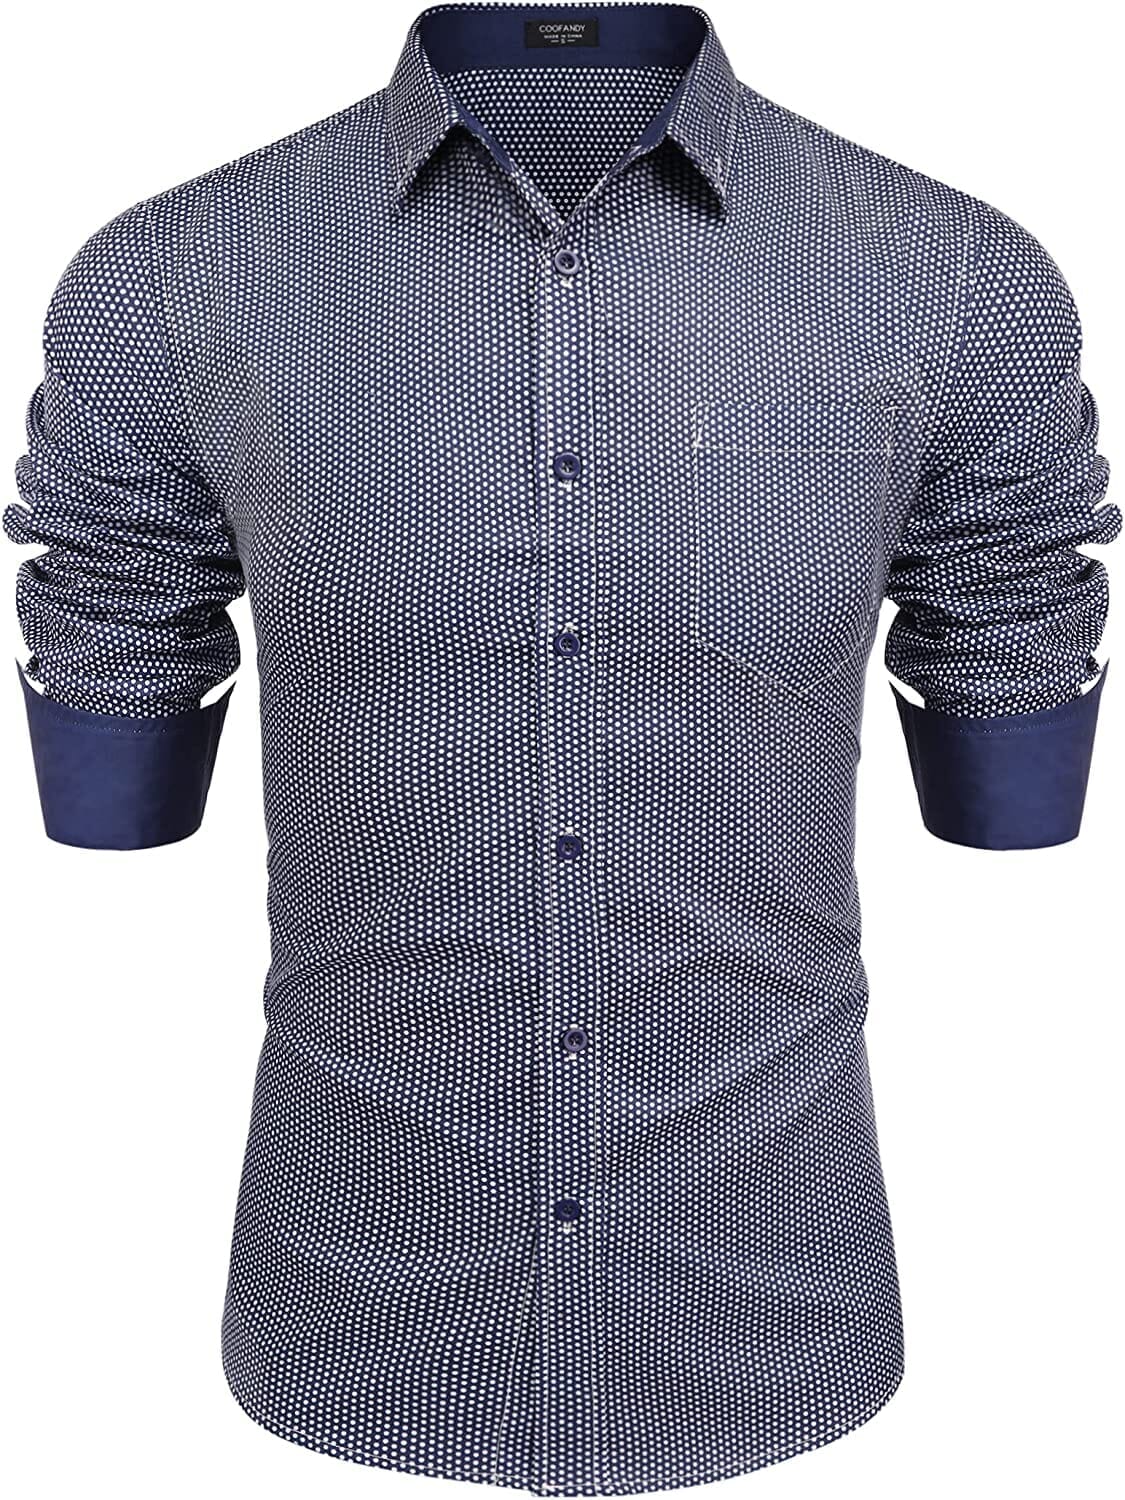 Coofandy Men's Casual Long Sleeve Shirt (US Only) Shirts Coofandy's Navy Blue(honeycomb) S 